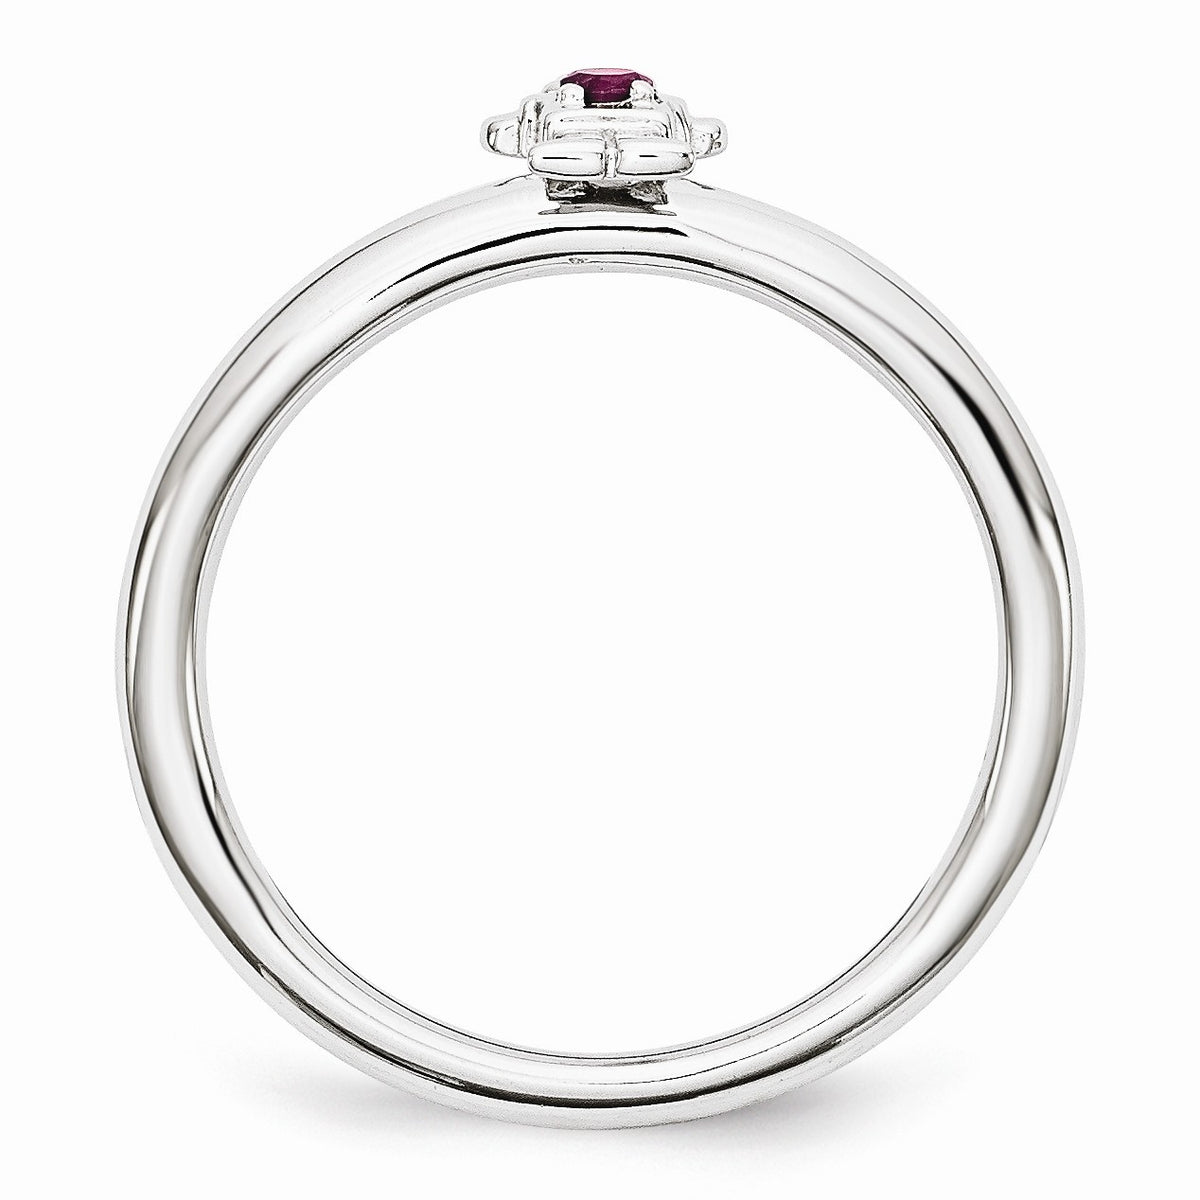 Alternate view of the Rhodium Plated Sterling Silver Stackable Rhodolite Garnet 7mm Boy Ring by The Black Bow Jewelry Co.